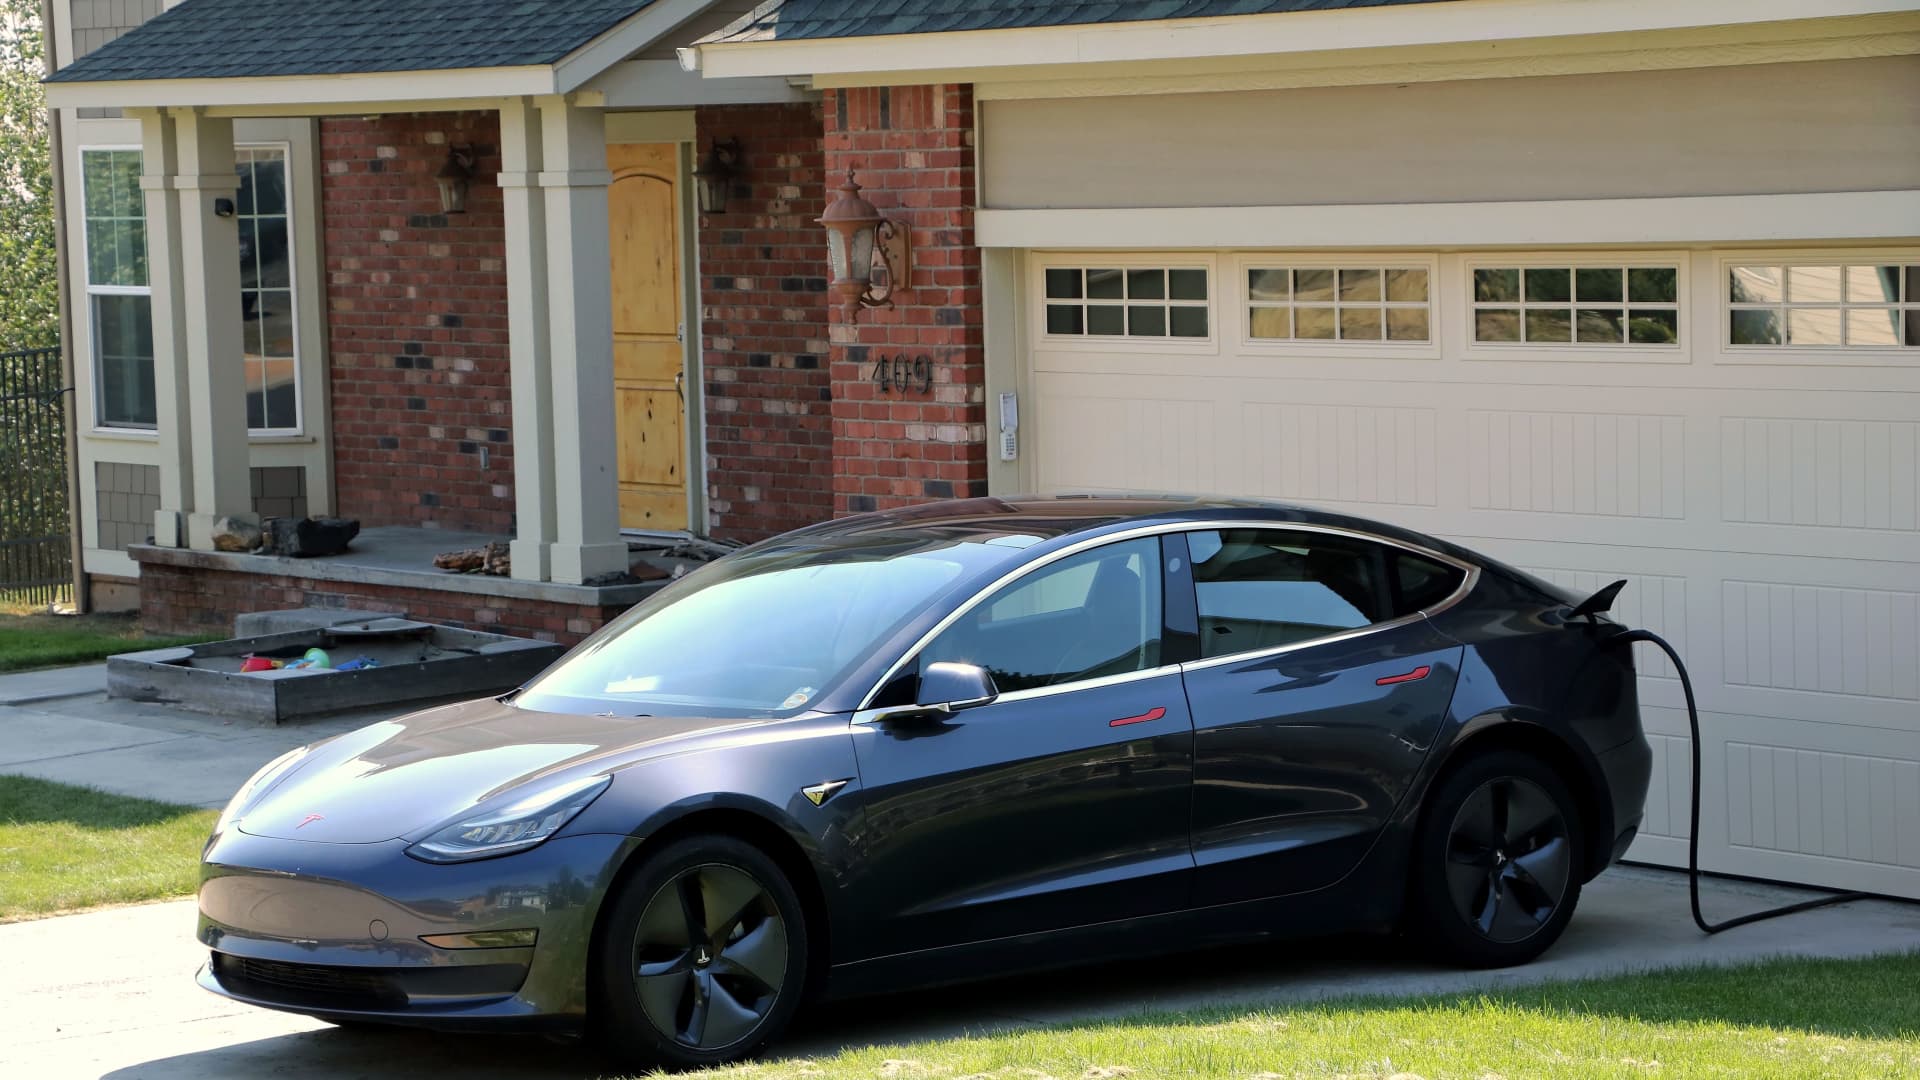 How Do You Charge an EV at Home?